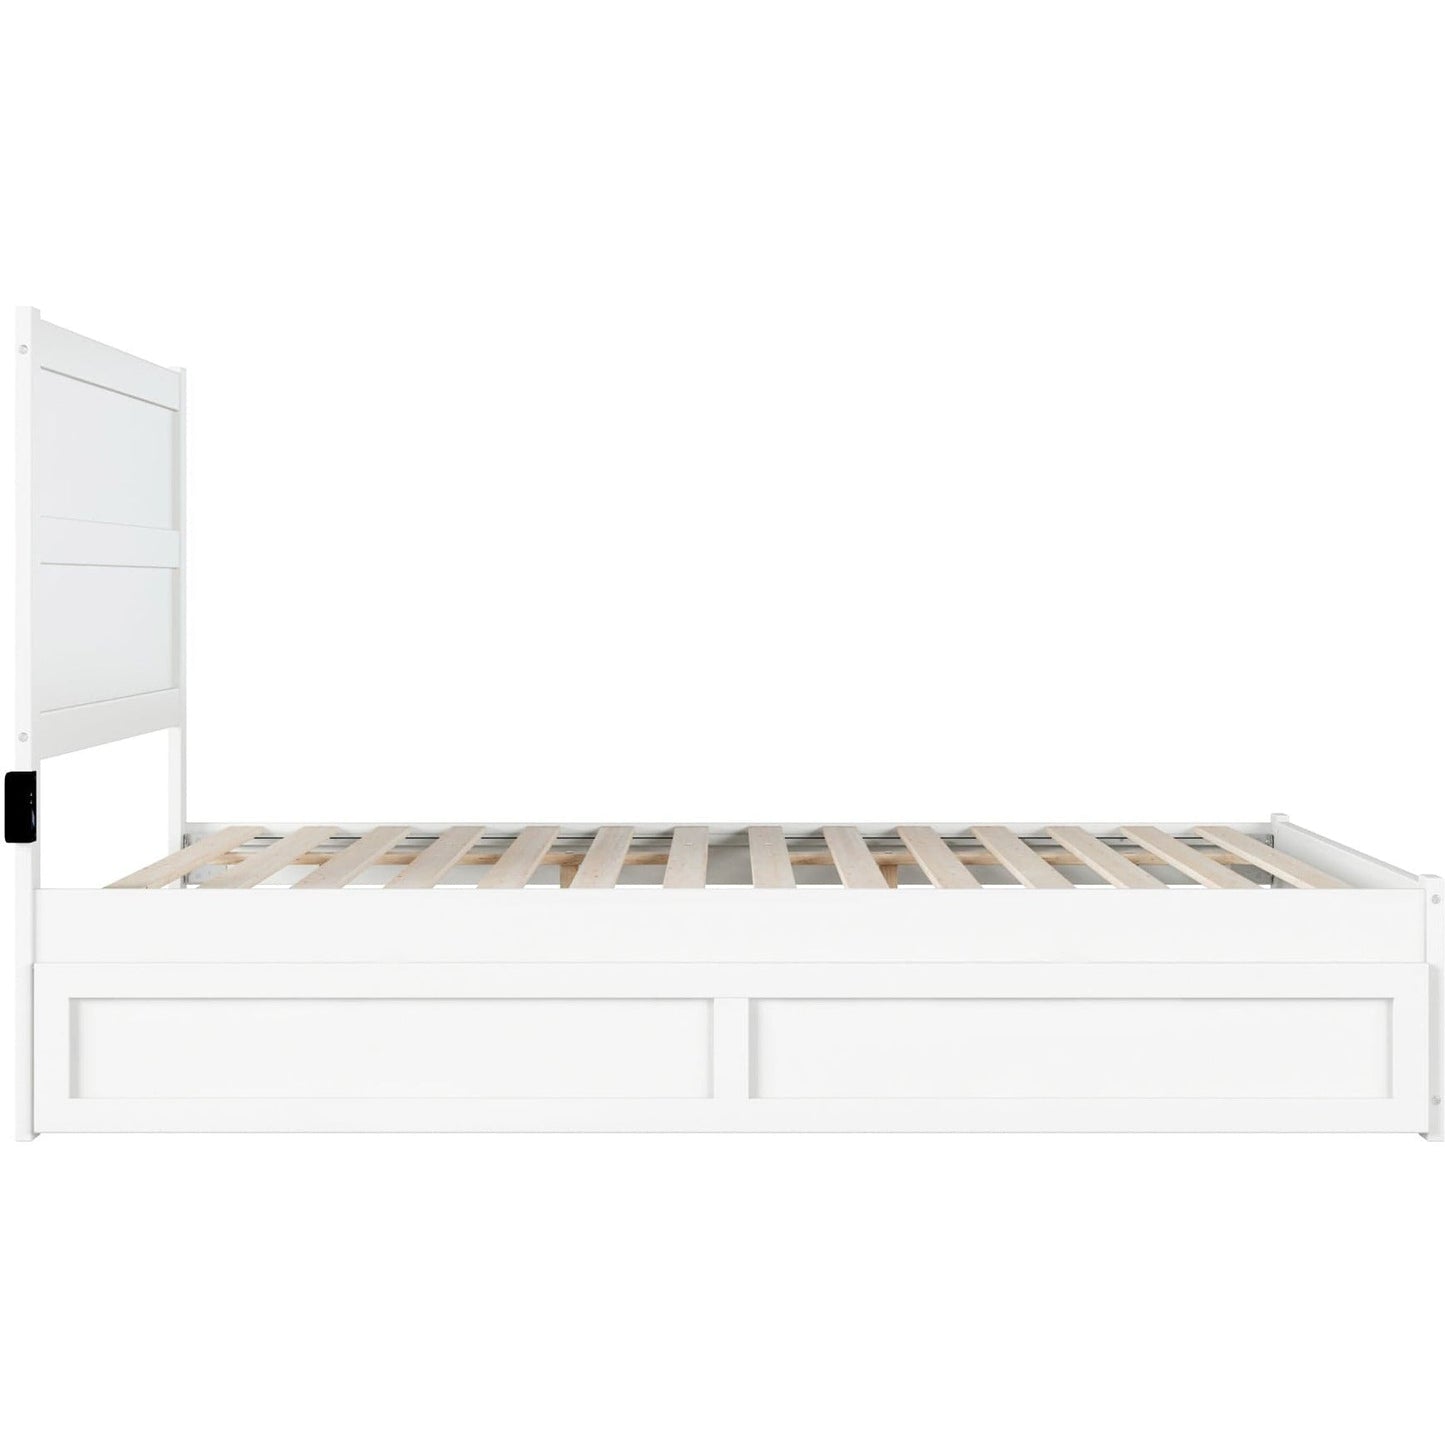 AFI Furnishings NoHo Queen Bed with Footboard and Twin Extra Long Trundle in White AG9161142